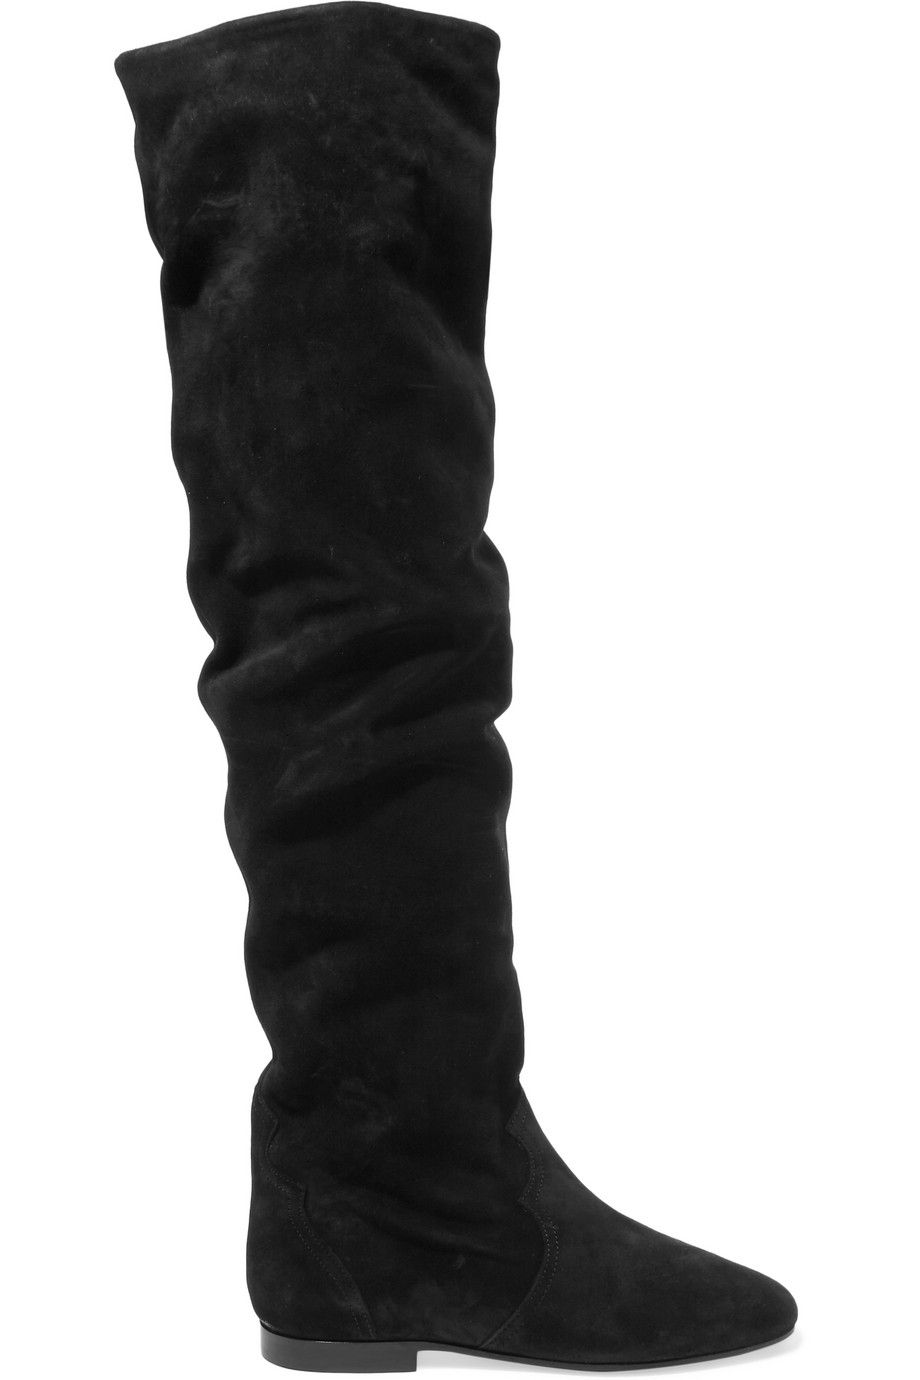 Footwear, Boot, Shoe, Knee-high boot, Leather, Suede, Durango boot, Riding boot, Cowboy boot, 